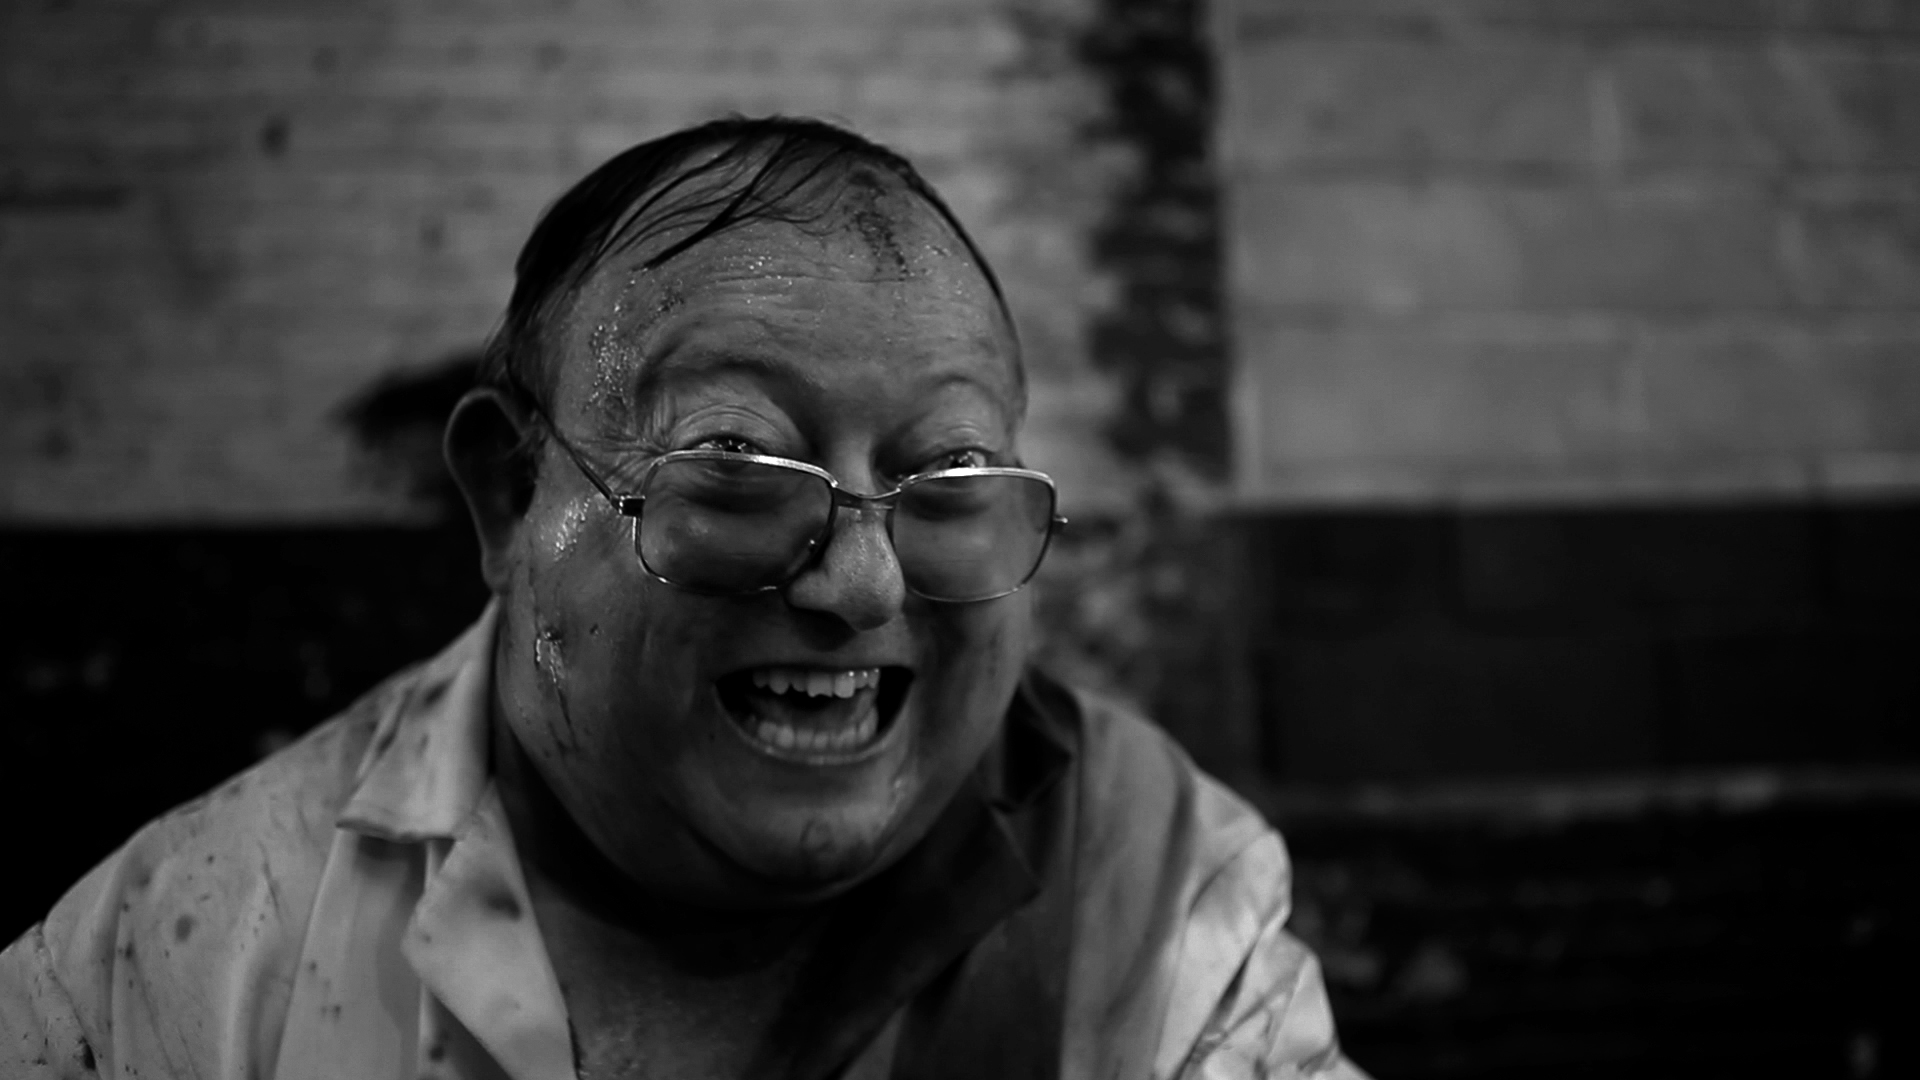 Review 'The Human Centipede Part 2 (Full Sequence)'